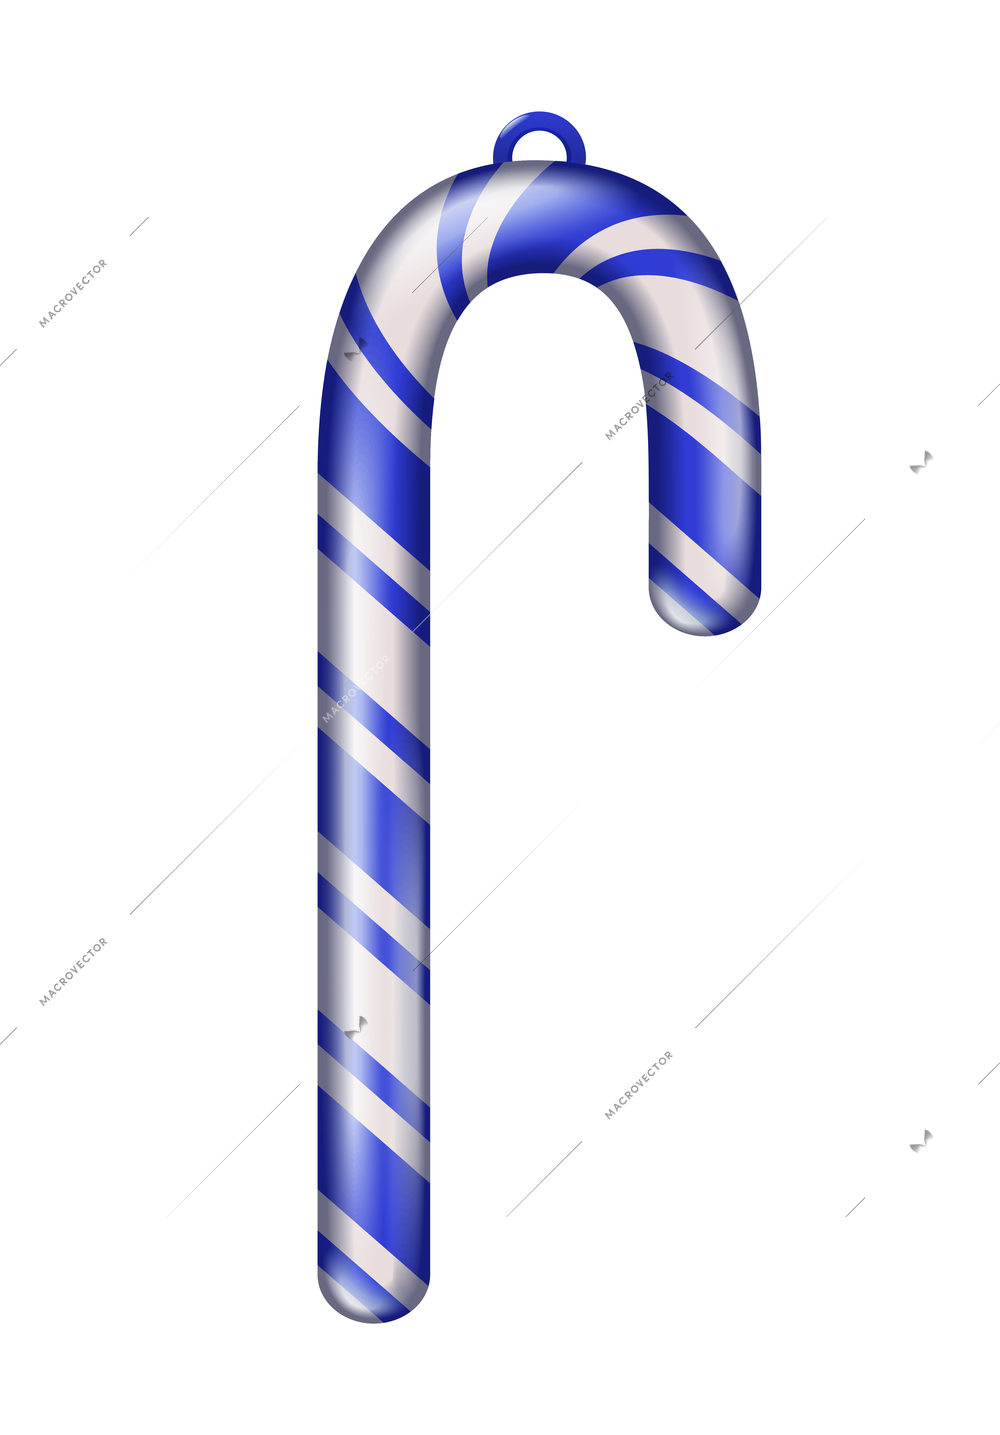 Realistic christmas tree toy composition with sweet candy stick shaped christmas ornament vector illustration